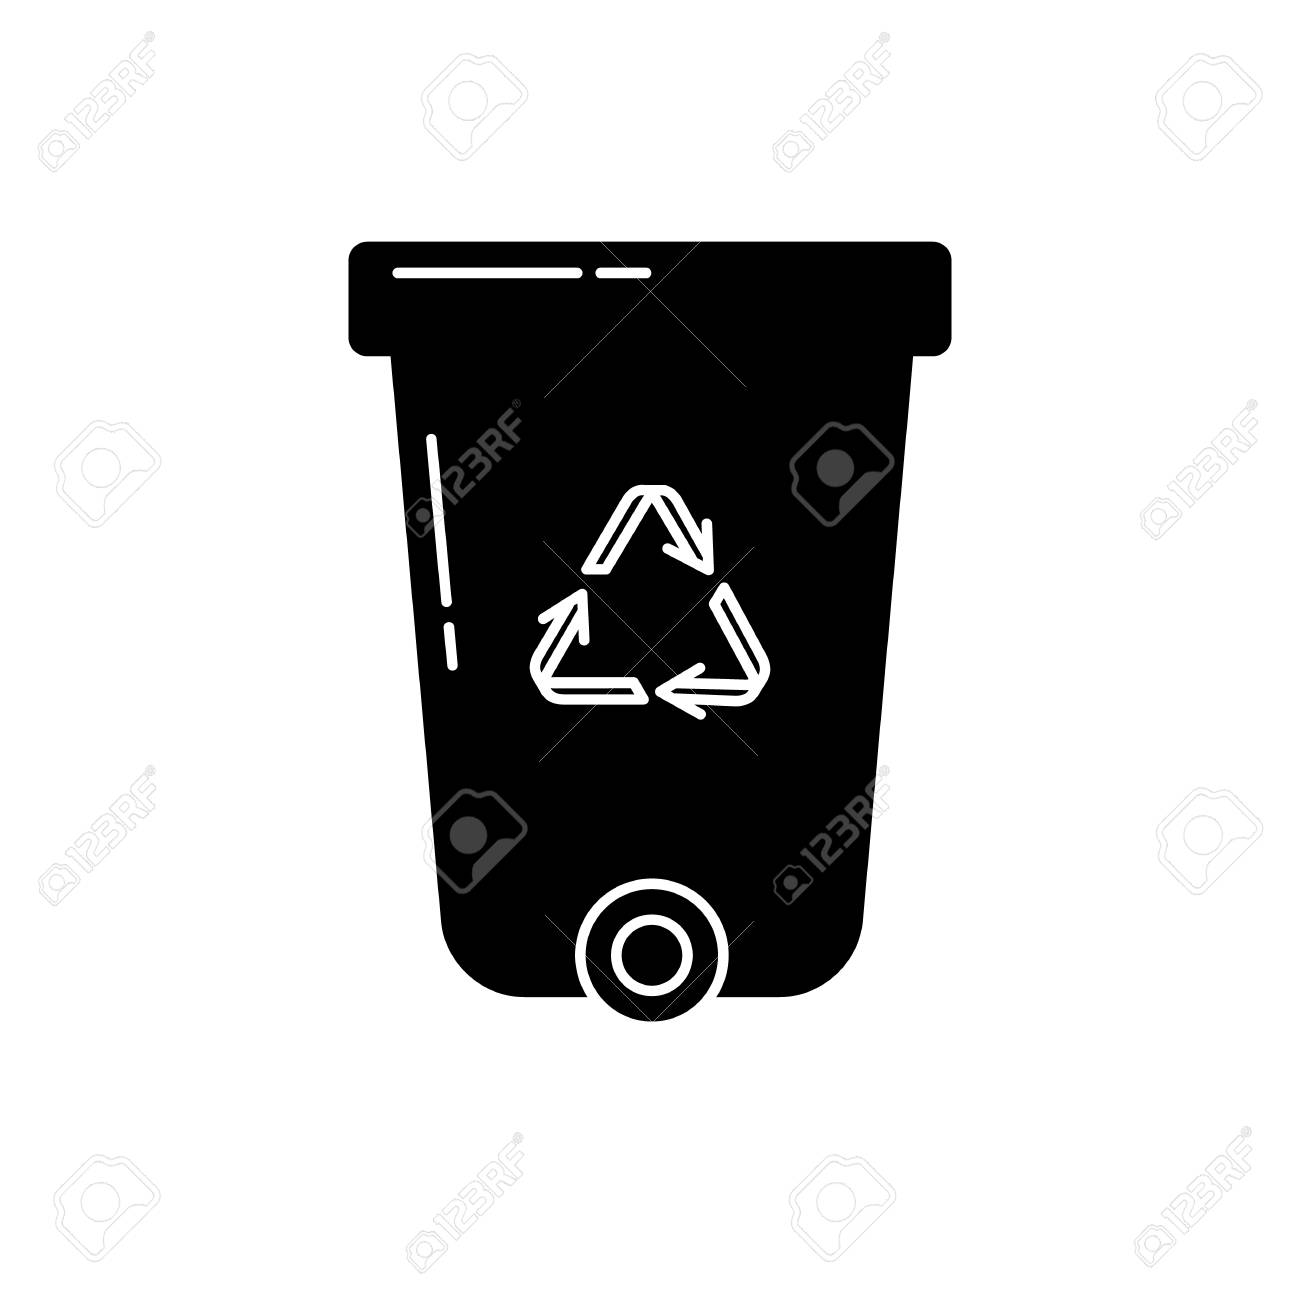 Recycling Bin - Free other icons